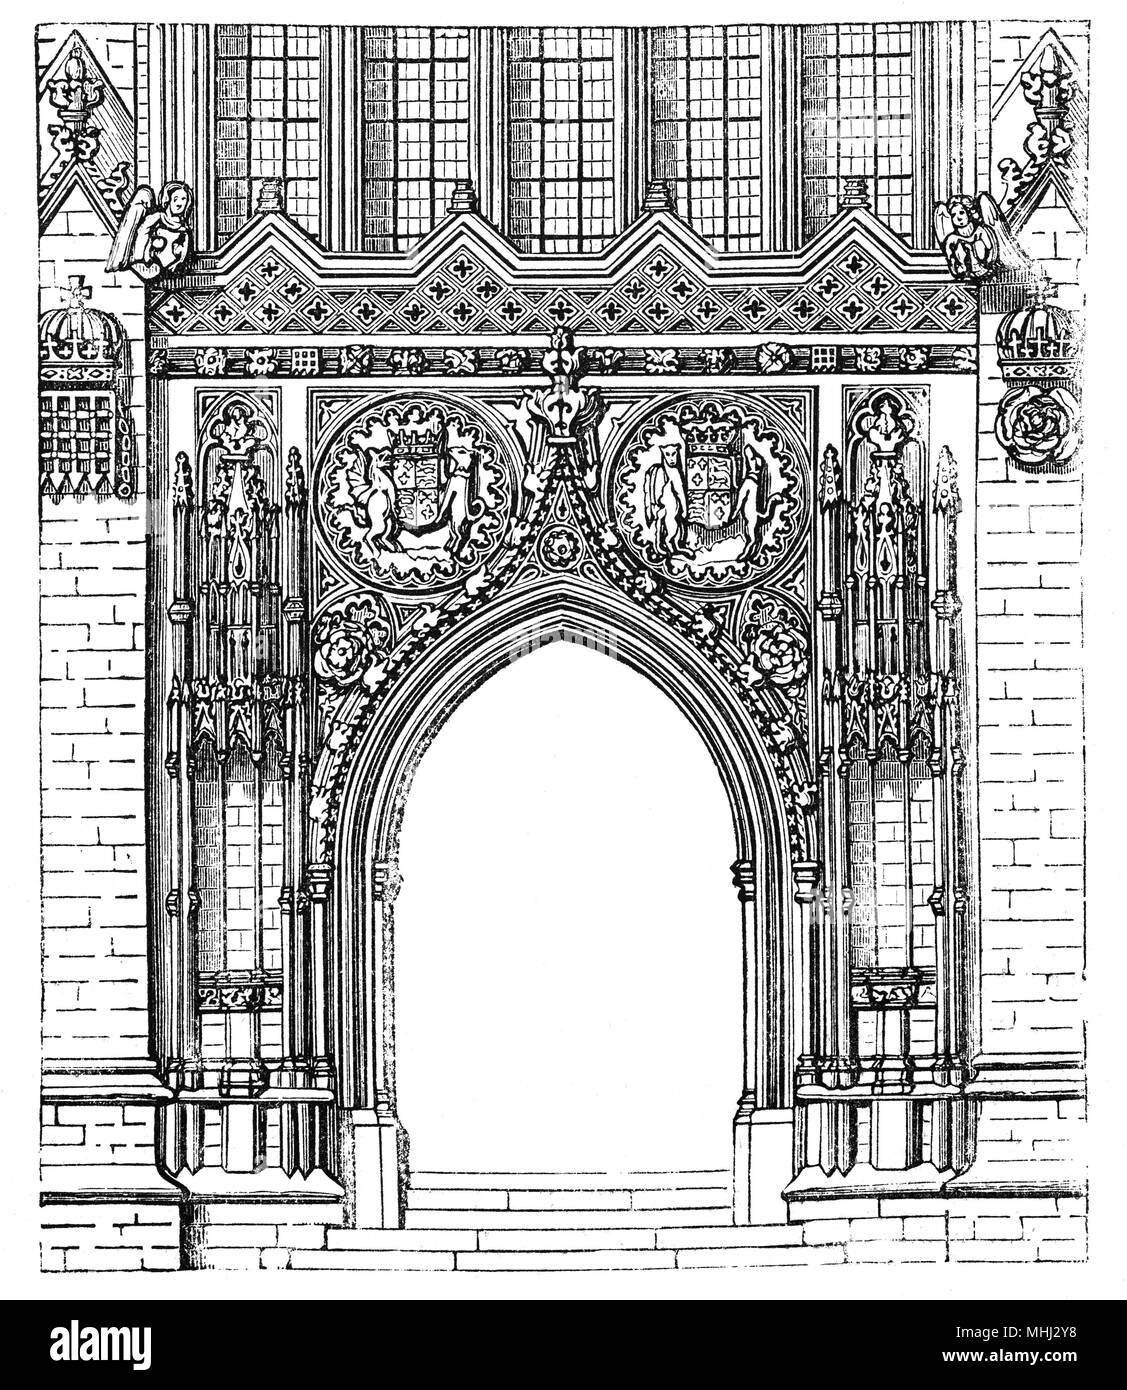 The ornate entrance to  King's College Chapel in the University of Cambridge. Considered to be one of the finest examples of late Perpendicular Gothic English architecture, it was built in phases by a succession of kings of England from 1446 to 1515, a period which spanned the Wars of the Roses. The chapel's large stained glass windows were not completed until 1531, and its early Renaissance rood screen was erected in 1532–36. The chapel is an active house of worship, and home of the King's College Choir. Stock Photo